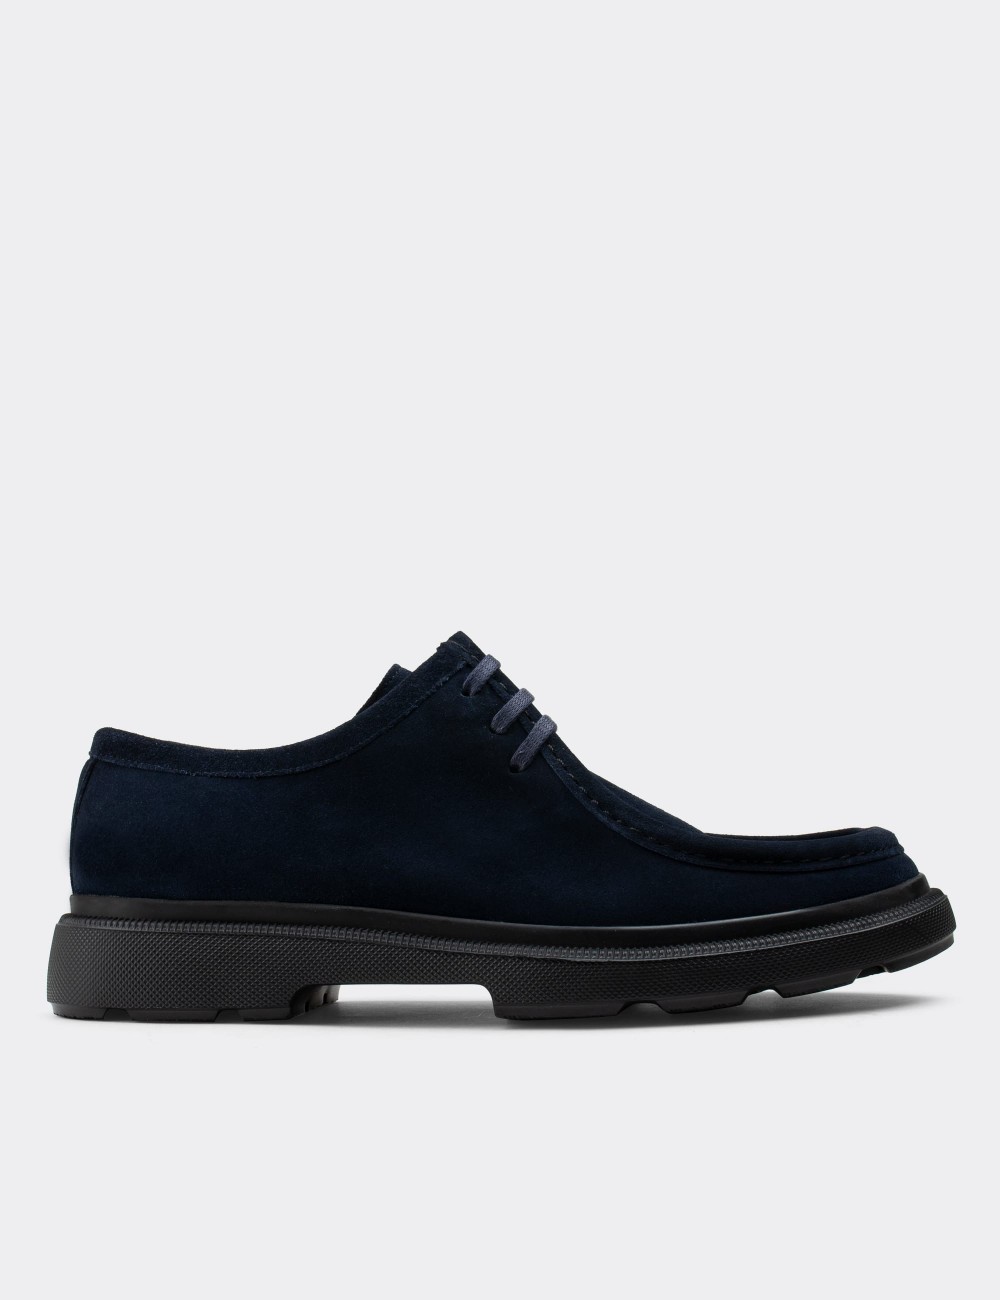 Navy Suede Leather Lace-up Shoes - 01851MLCVP01